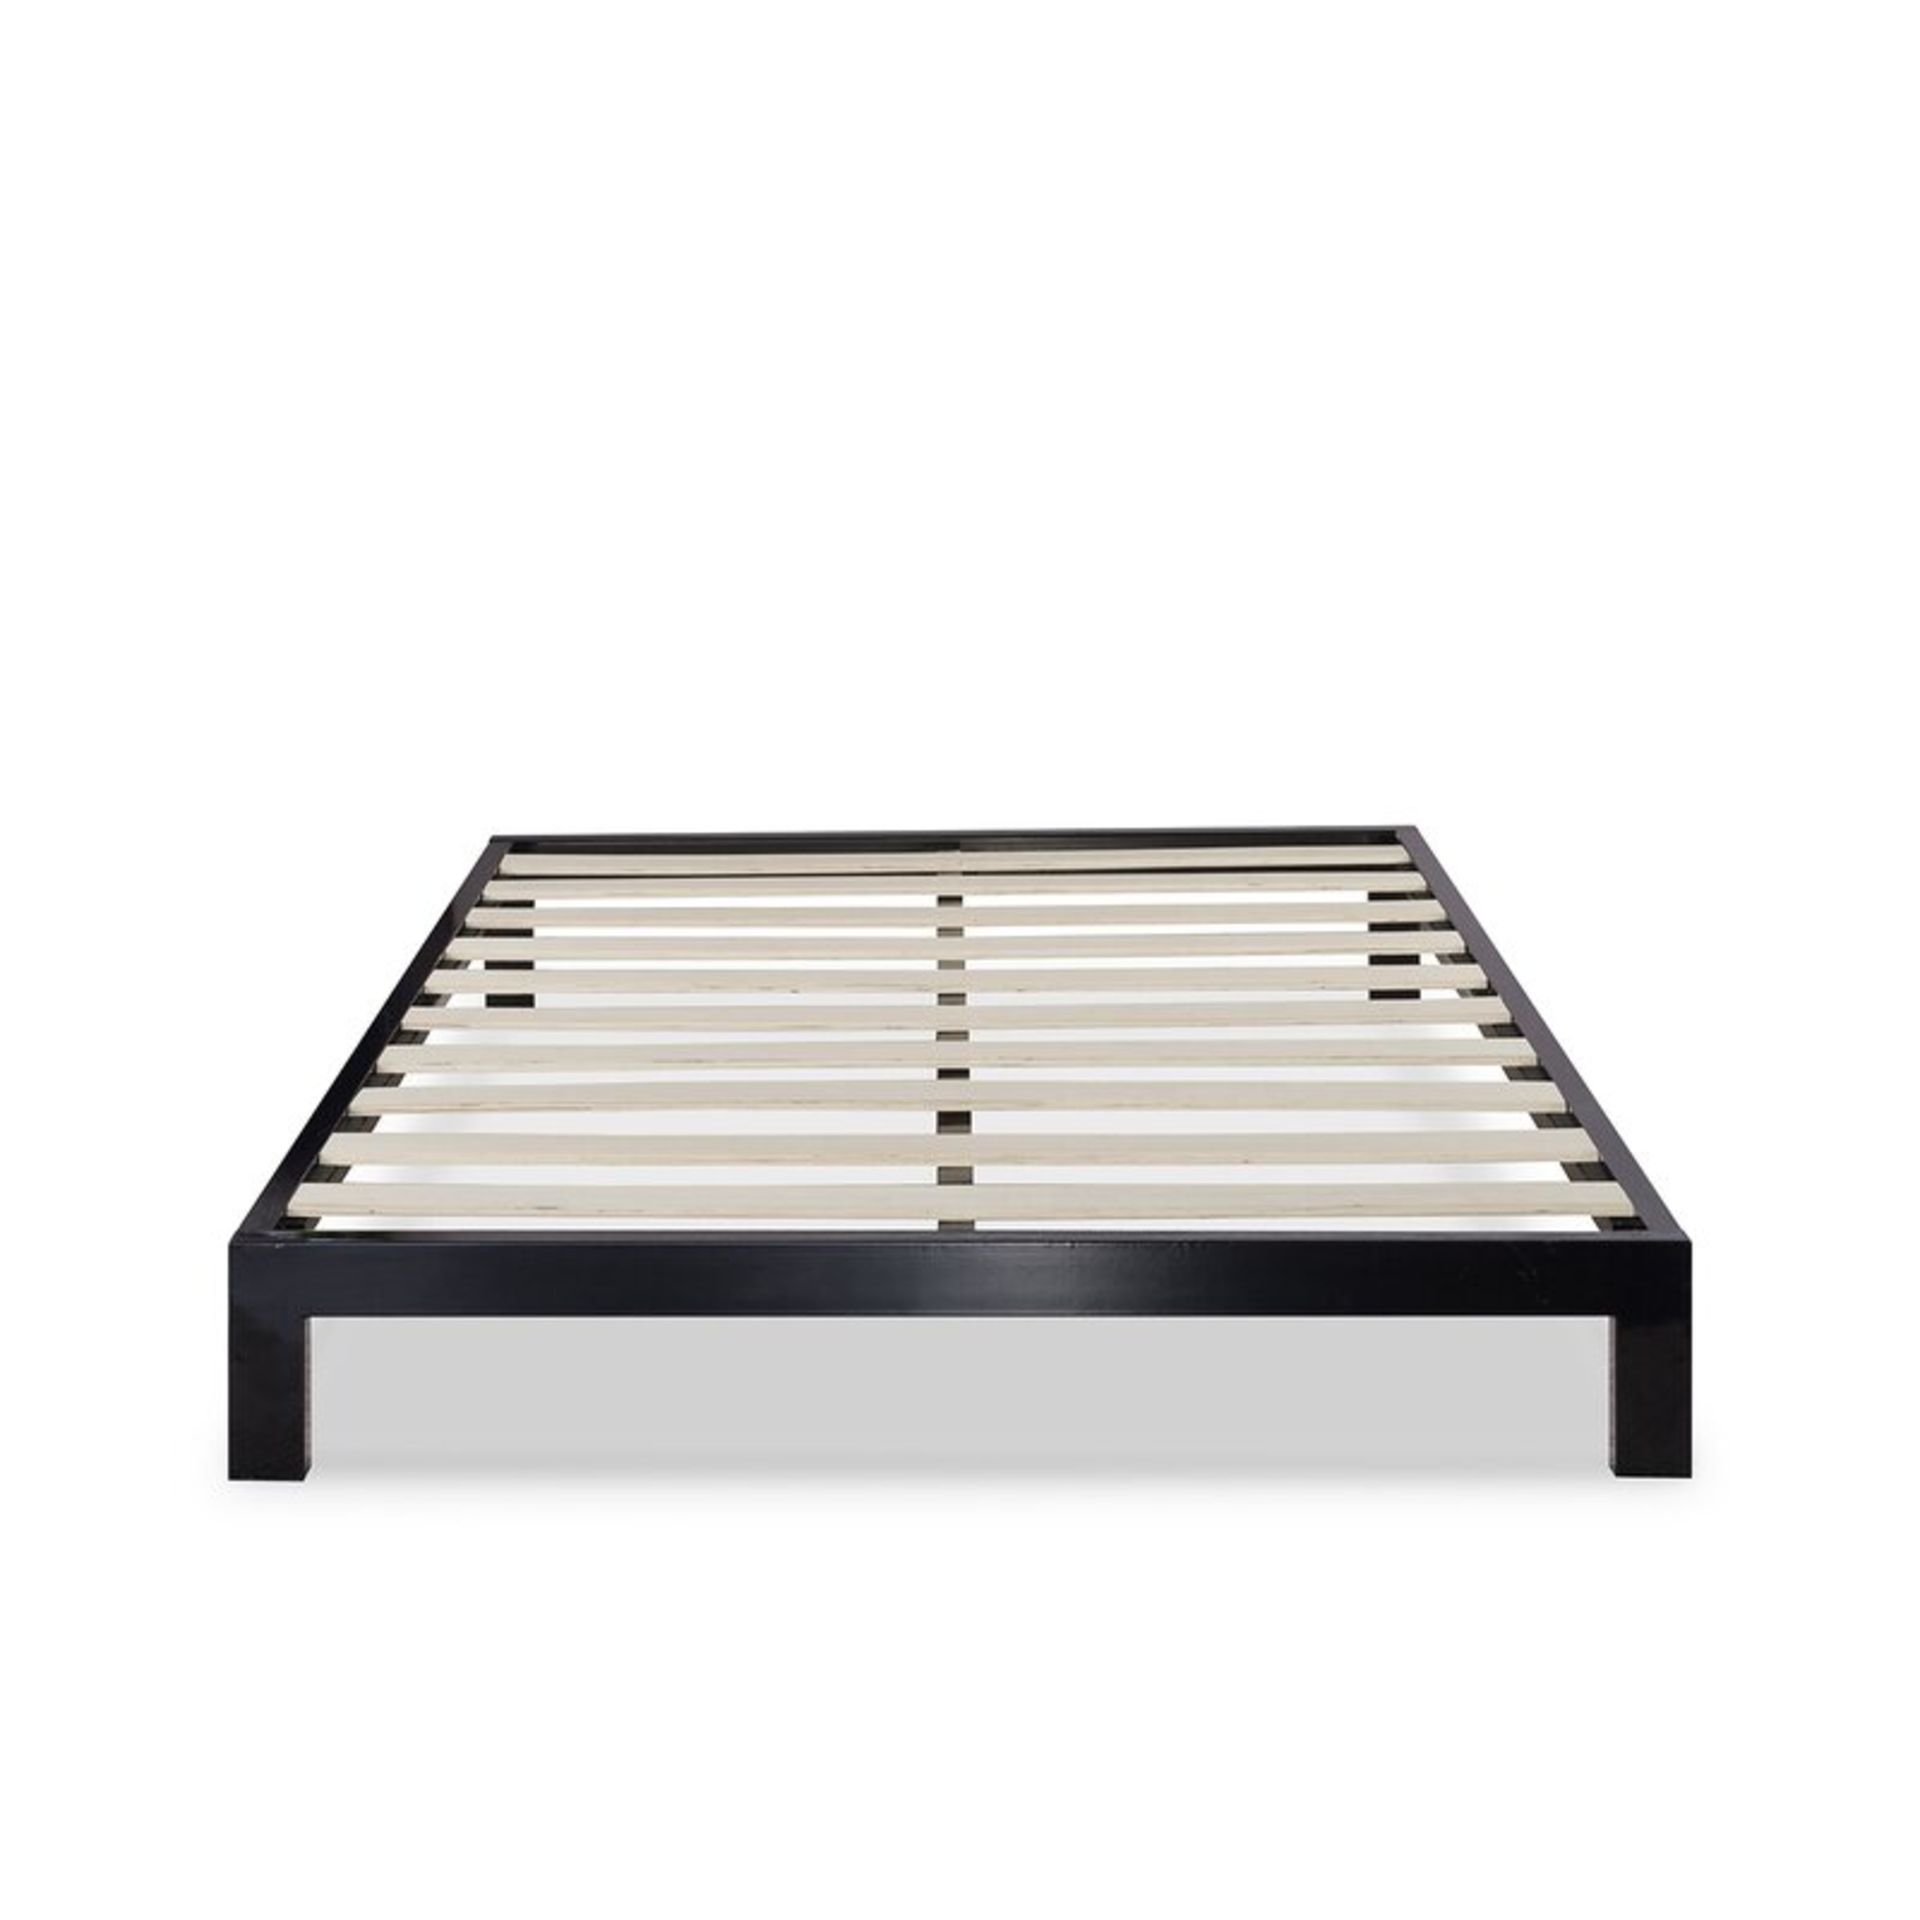 4FT 6 Double Whitty Platform Bed - RRP £116.99 - Image 3 of 3